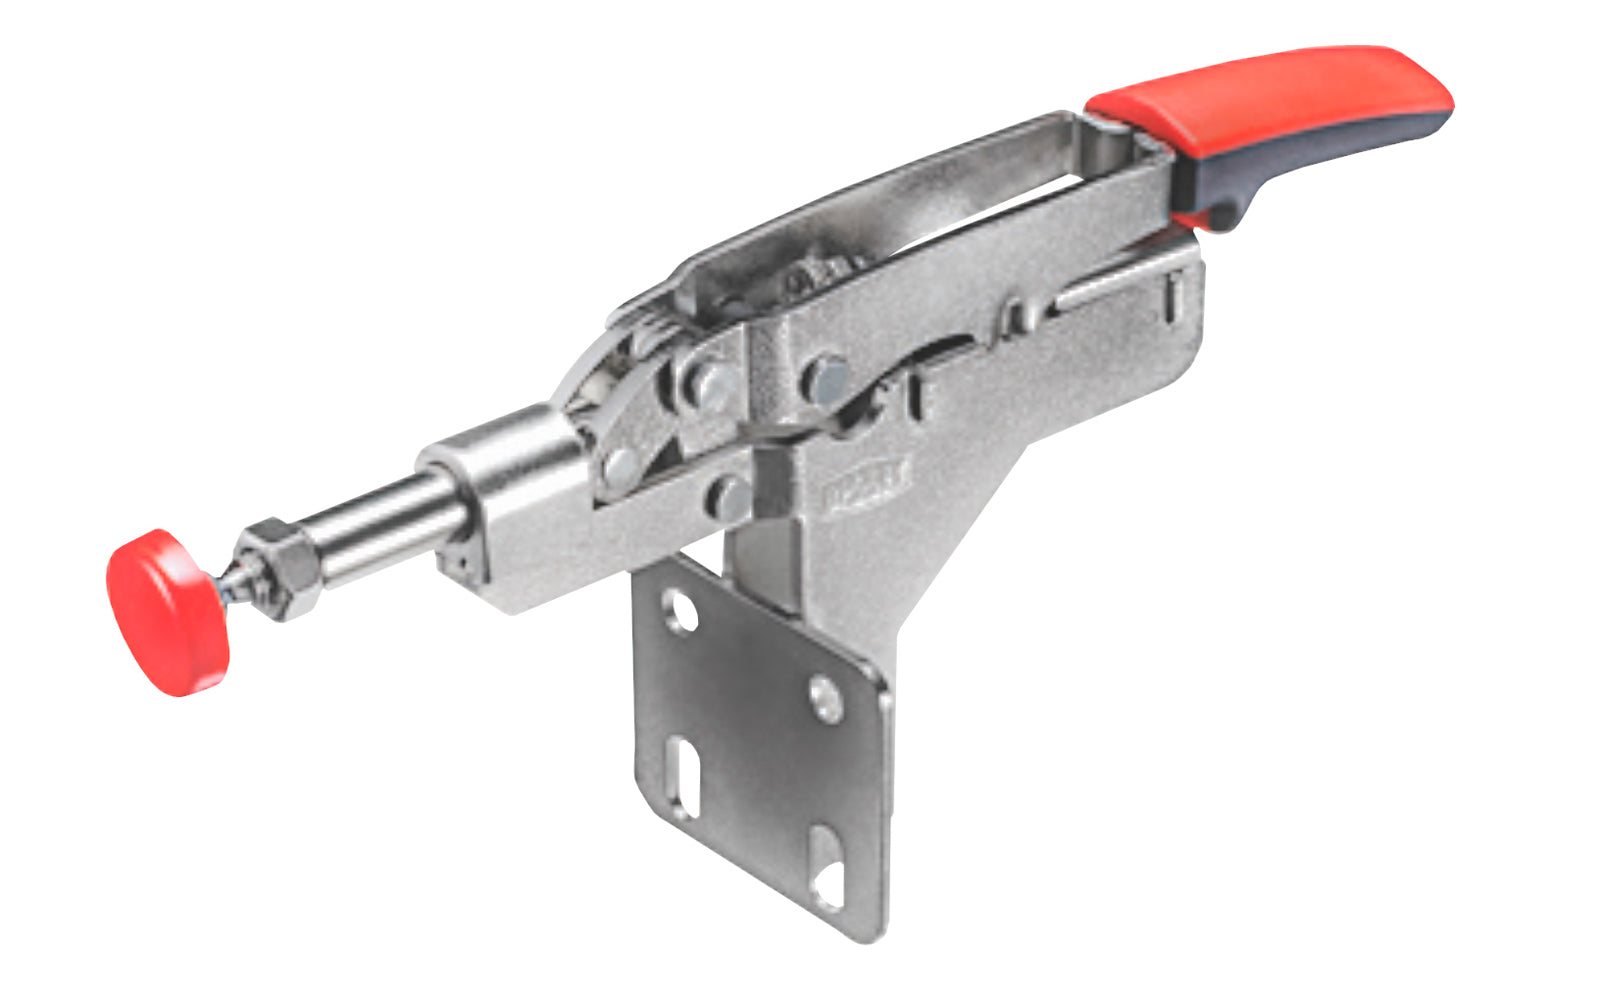 Bessey Auto-Adjust Horizontal Toggle Clamp - STC-IHA15. Auto-adjustment -  Self adjusts to variations in workpiece while maintaining clamping force - 3/8" clamping capacity. Adjustable clamping force based on the adjusting screw in the joint (Range of 25 to 250 lbs.). Holding capacity up to 450 lbs (nominal) ~ 788502201452